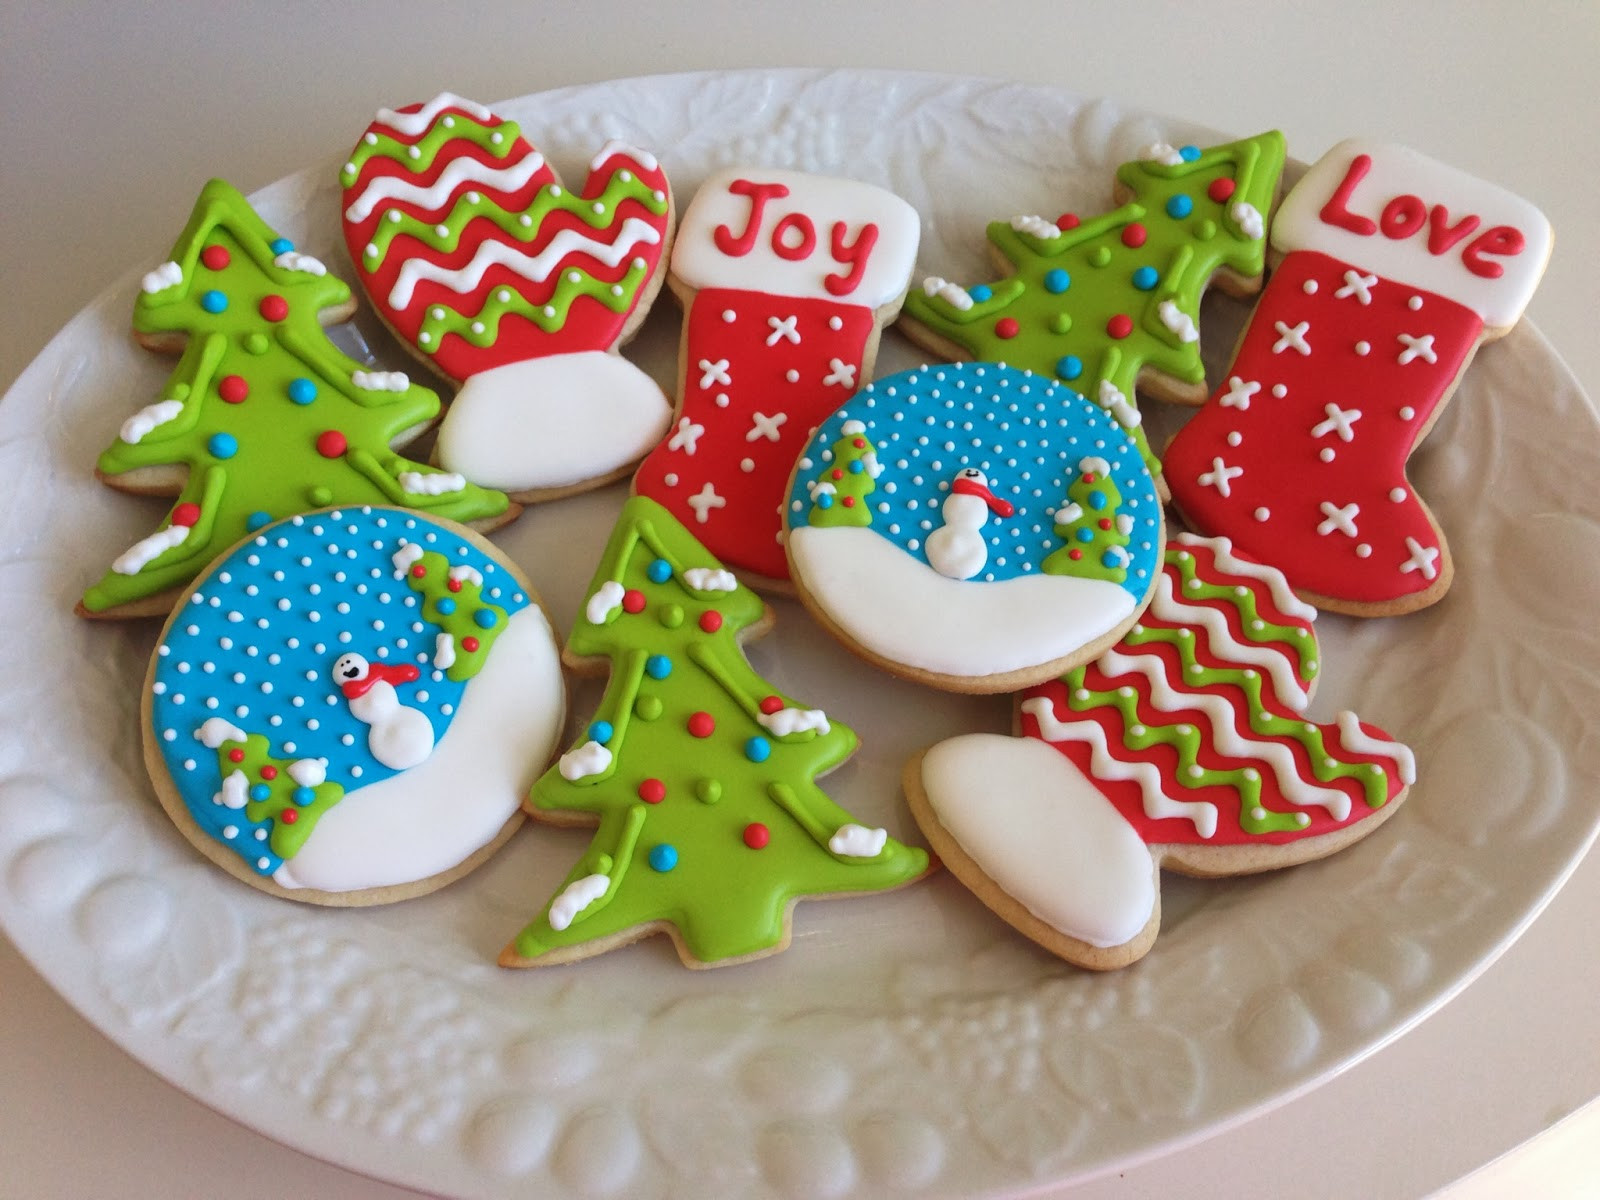 Christmas Cut Out Sugar Cookies Recipes
 monograms & cake Christmas Cut Out Sugar Cookies with